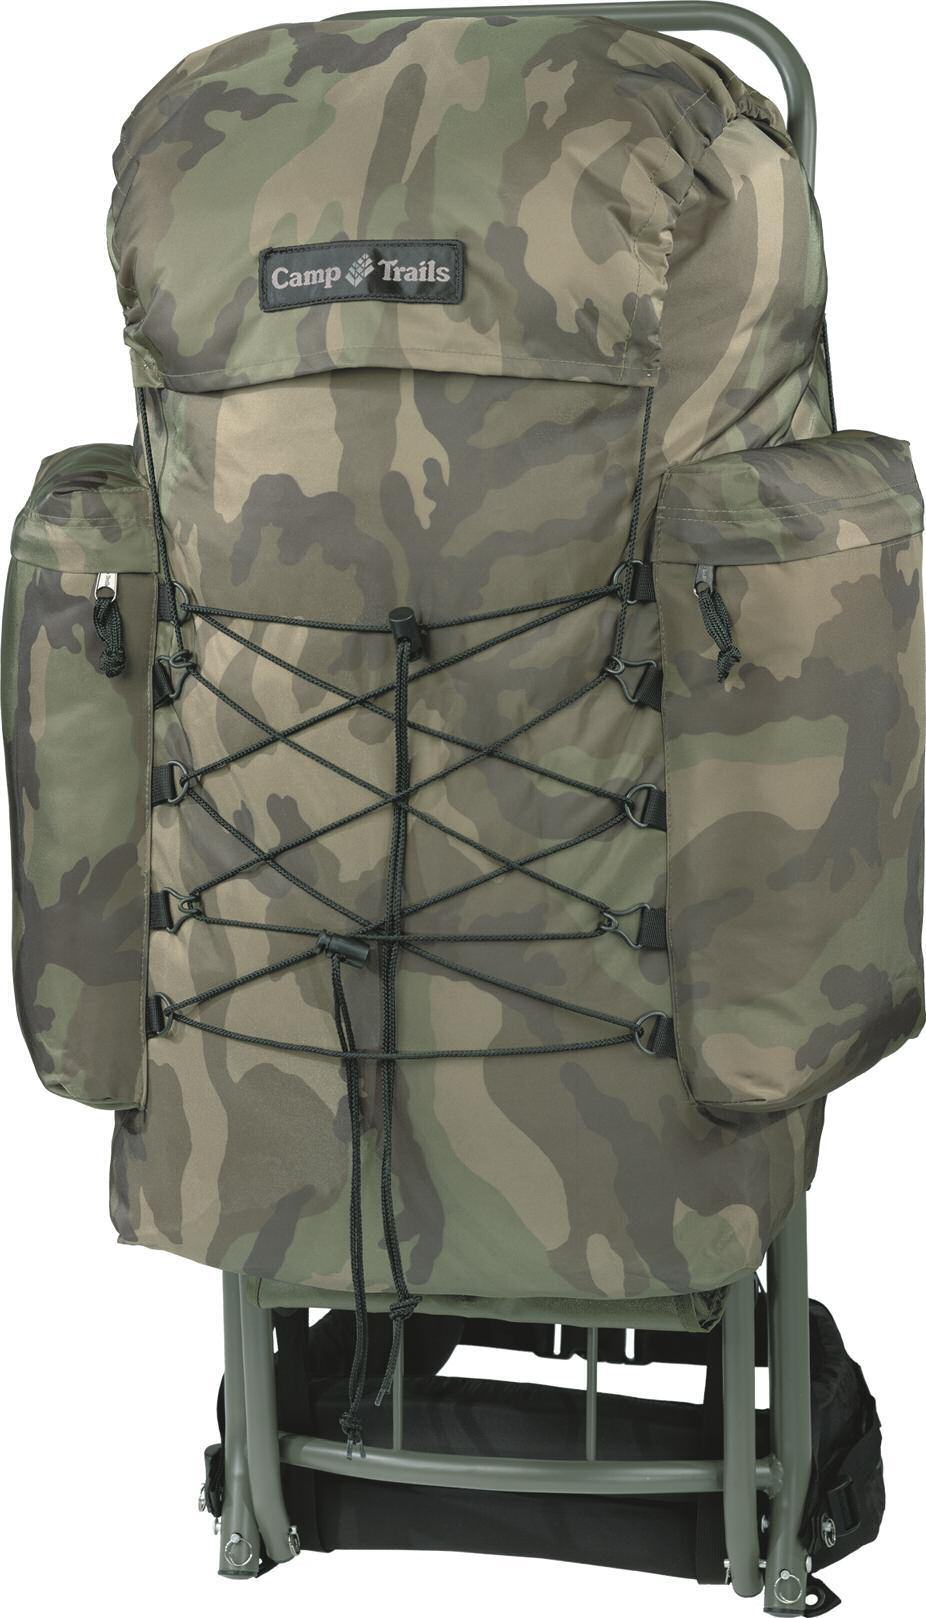 CAMP TRAILS CAMO PACKS 17 CT Moose Pack Complete with frame Pack Large main compartment storage. Foldaway lower shelf. Large side pockets.